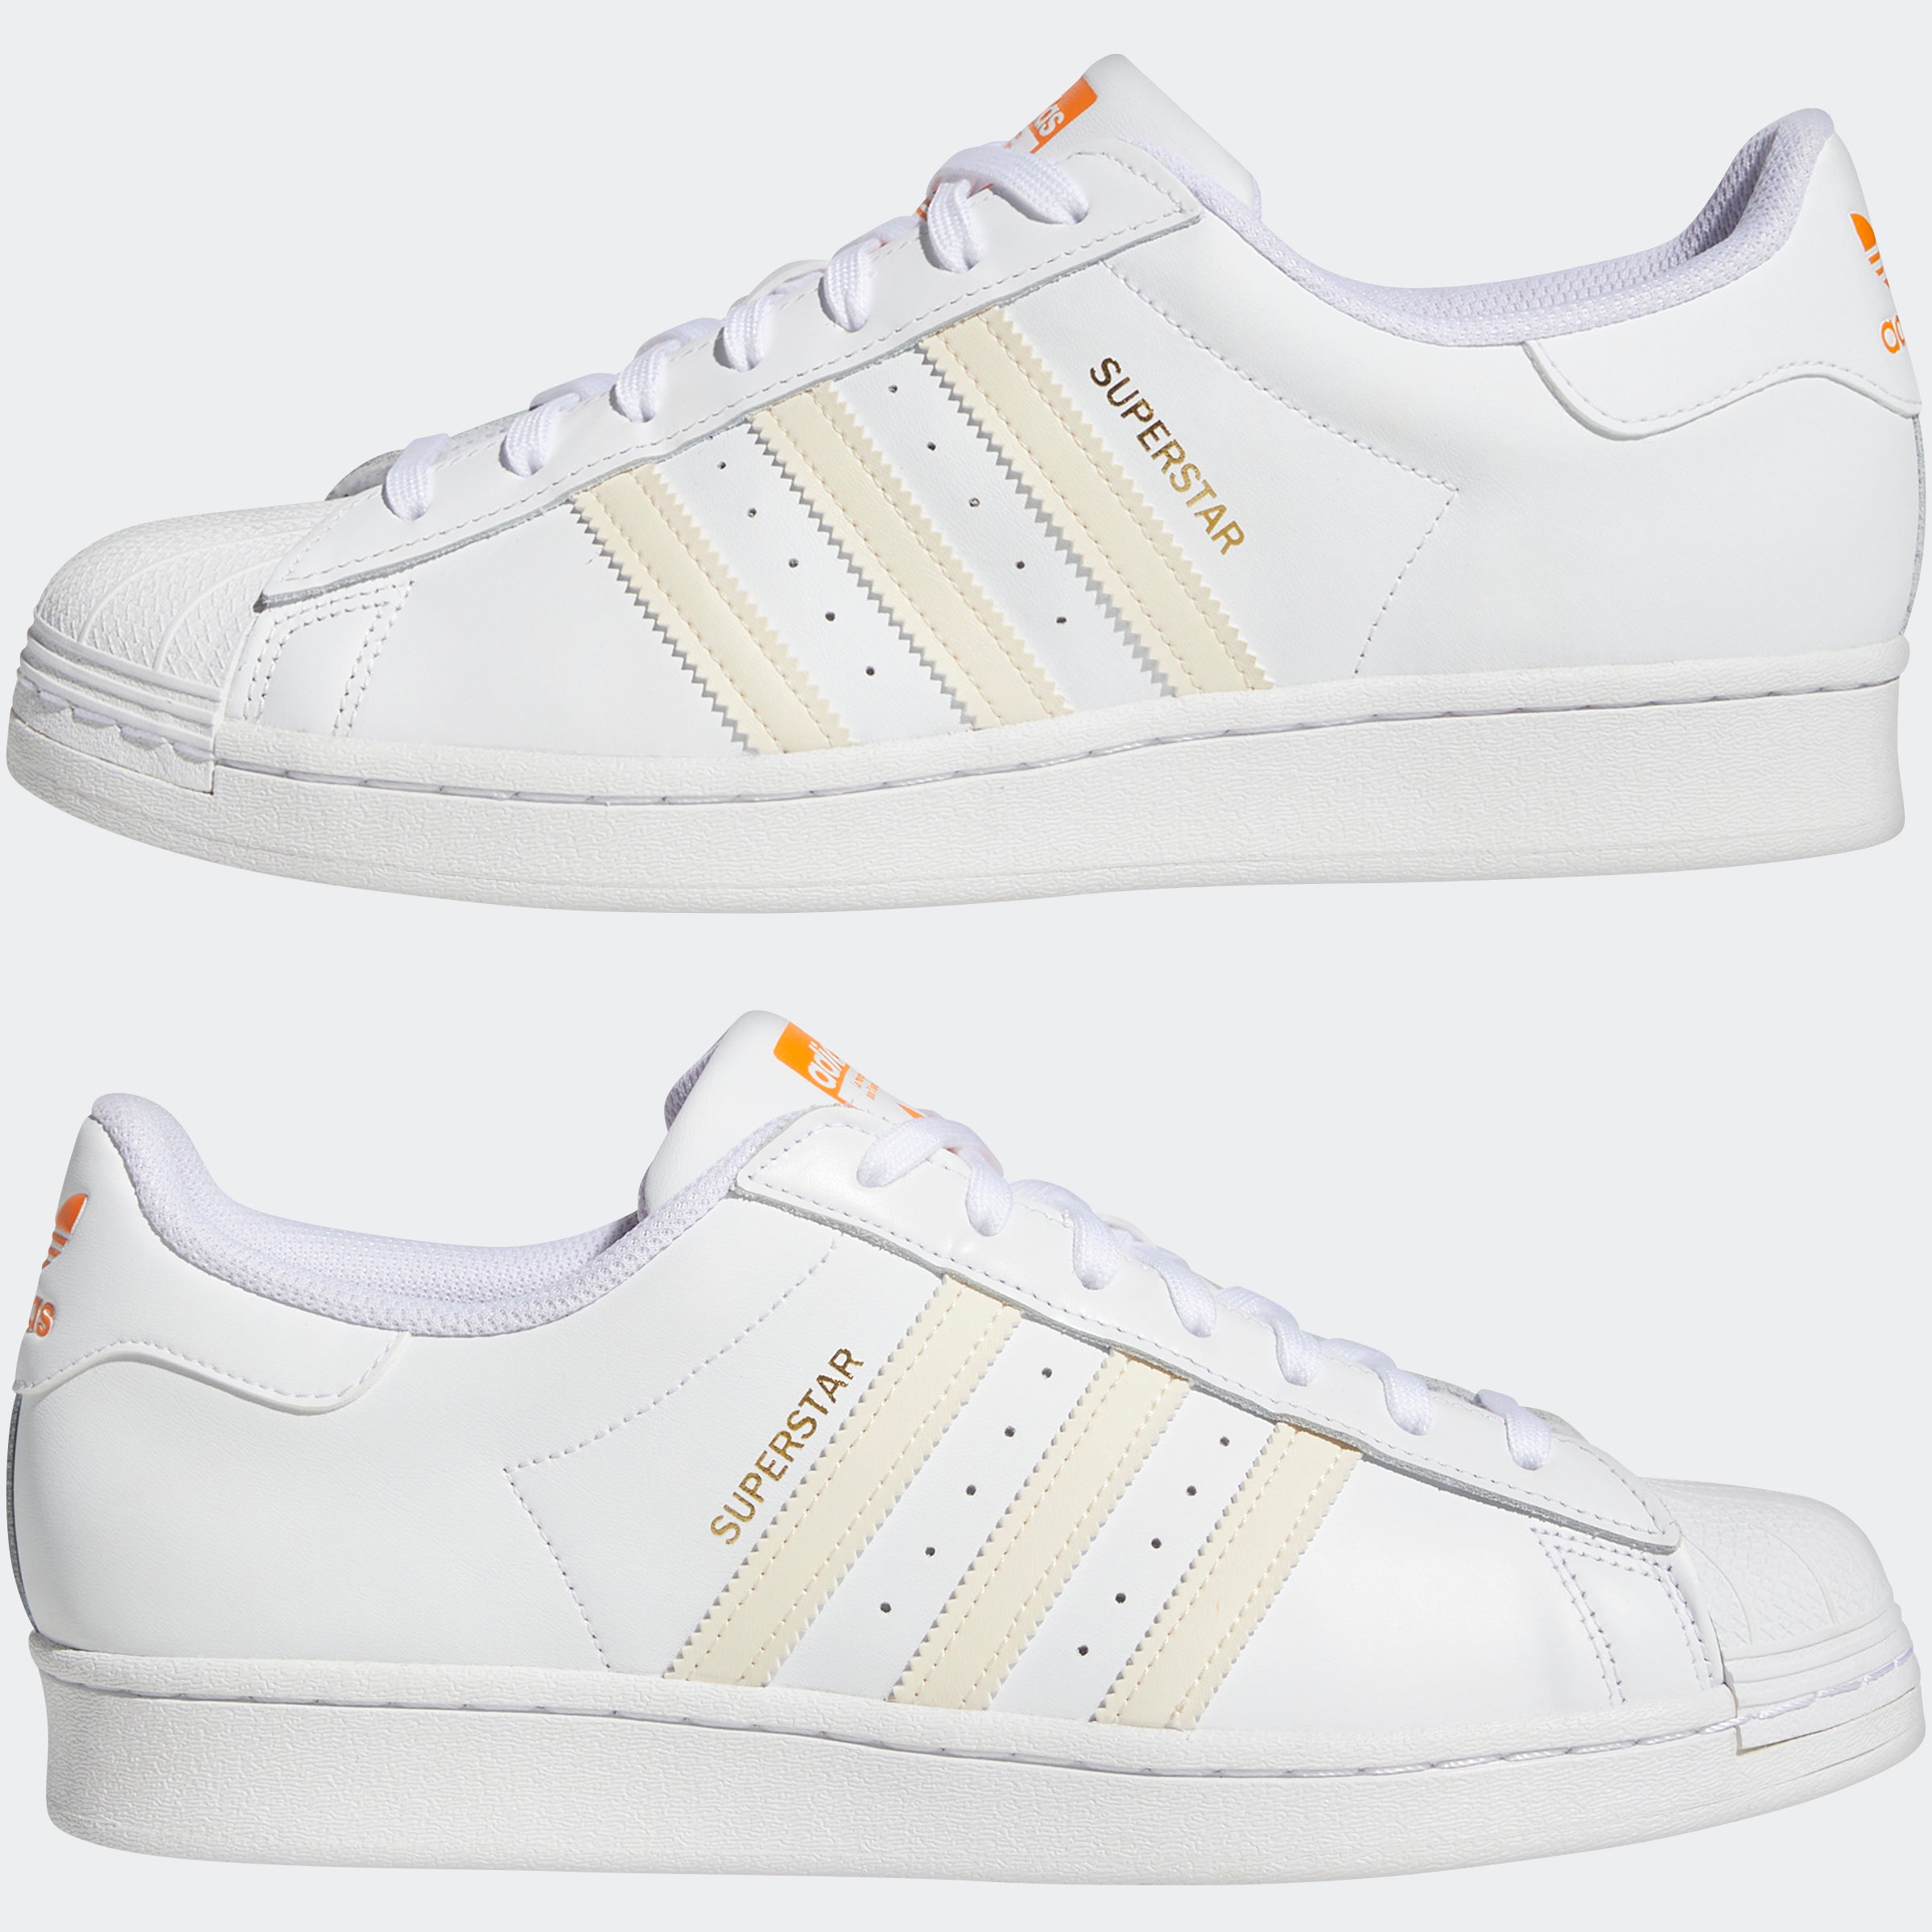  adidas Superstar Shoes Men's, White, Size 5